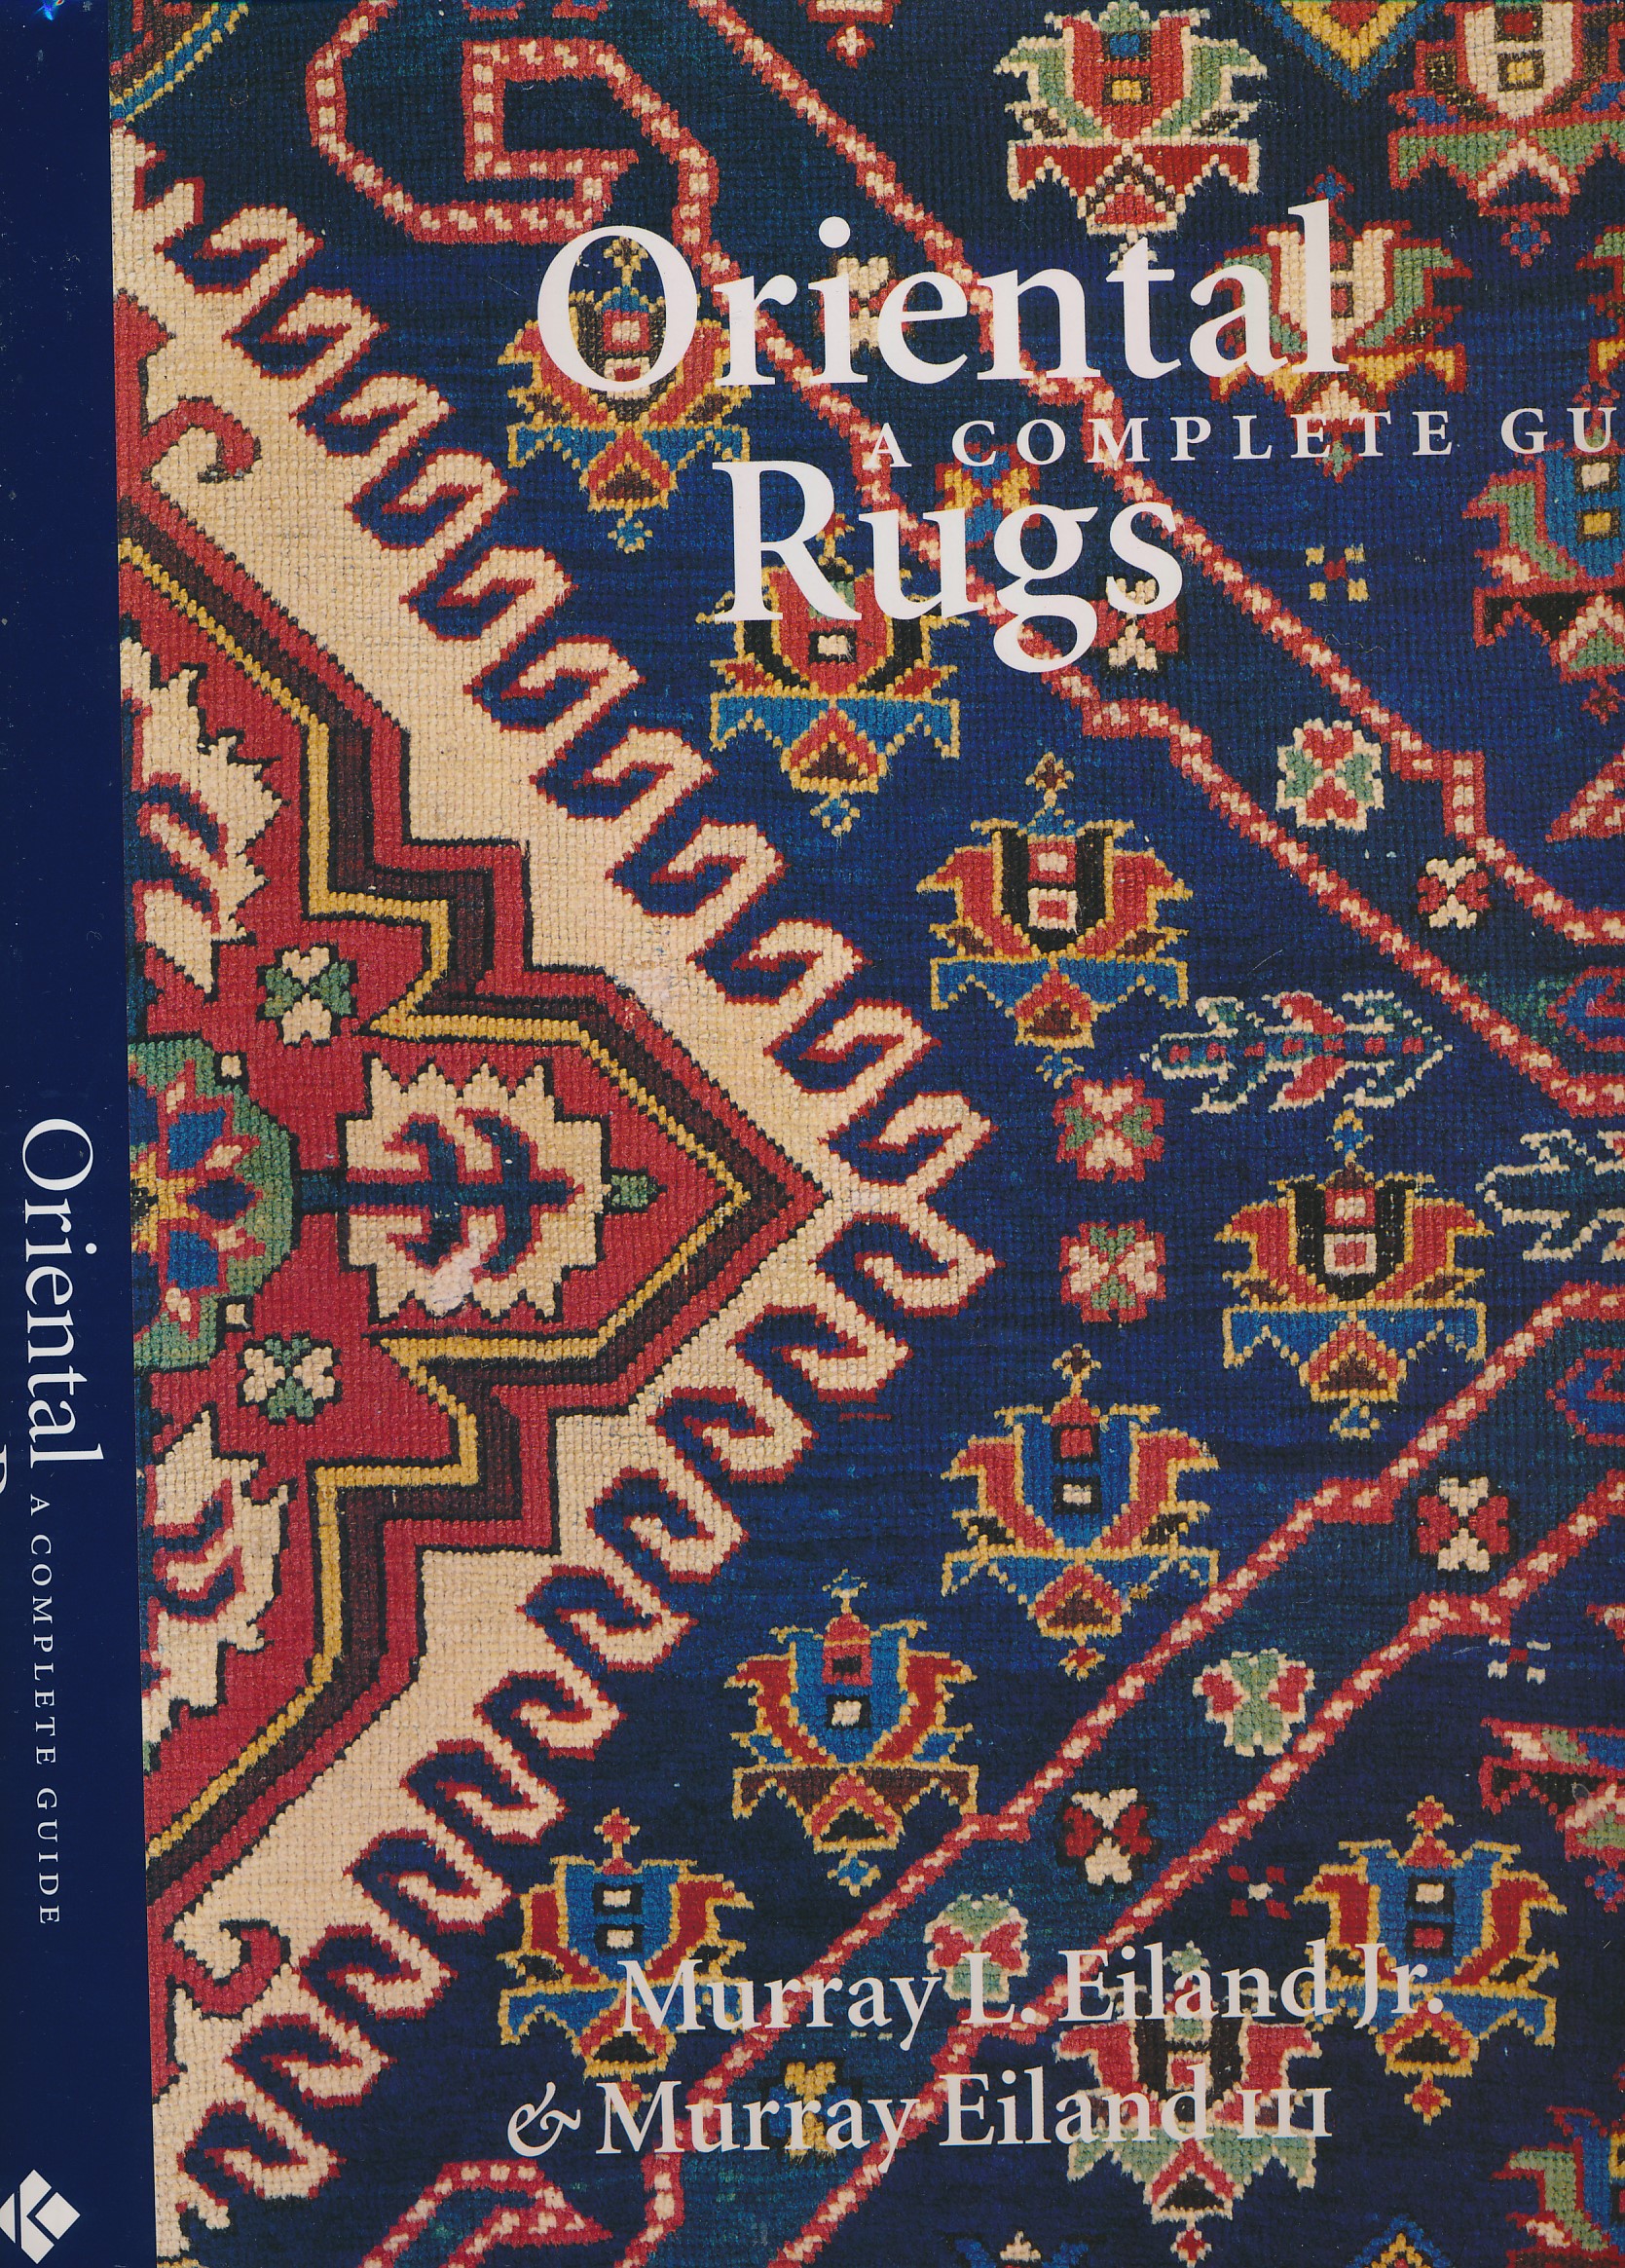 Oriental Rugs. A Complete Guide.